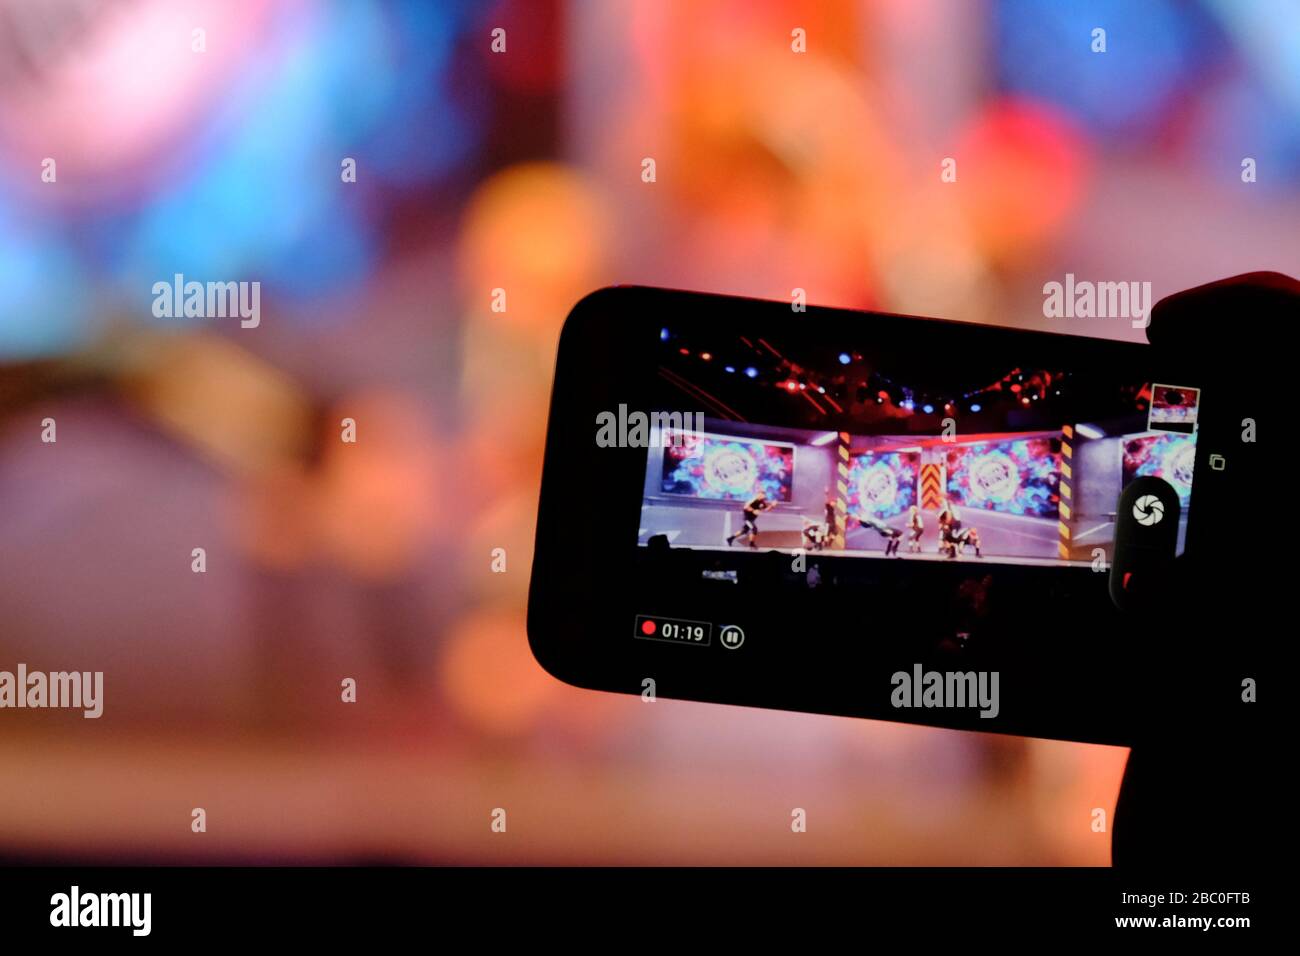 Person with iPhone in the audience filming performers on stage at Global Village, Dubai, United Arab Emirates. Stock Photo